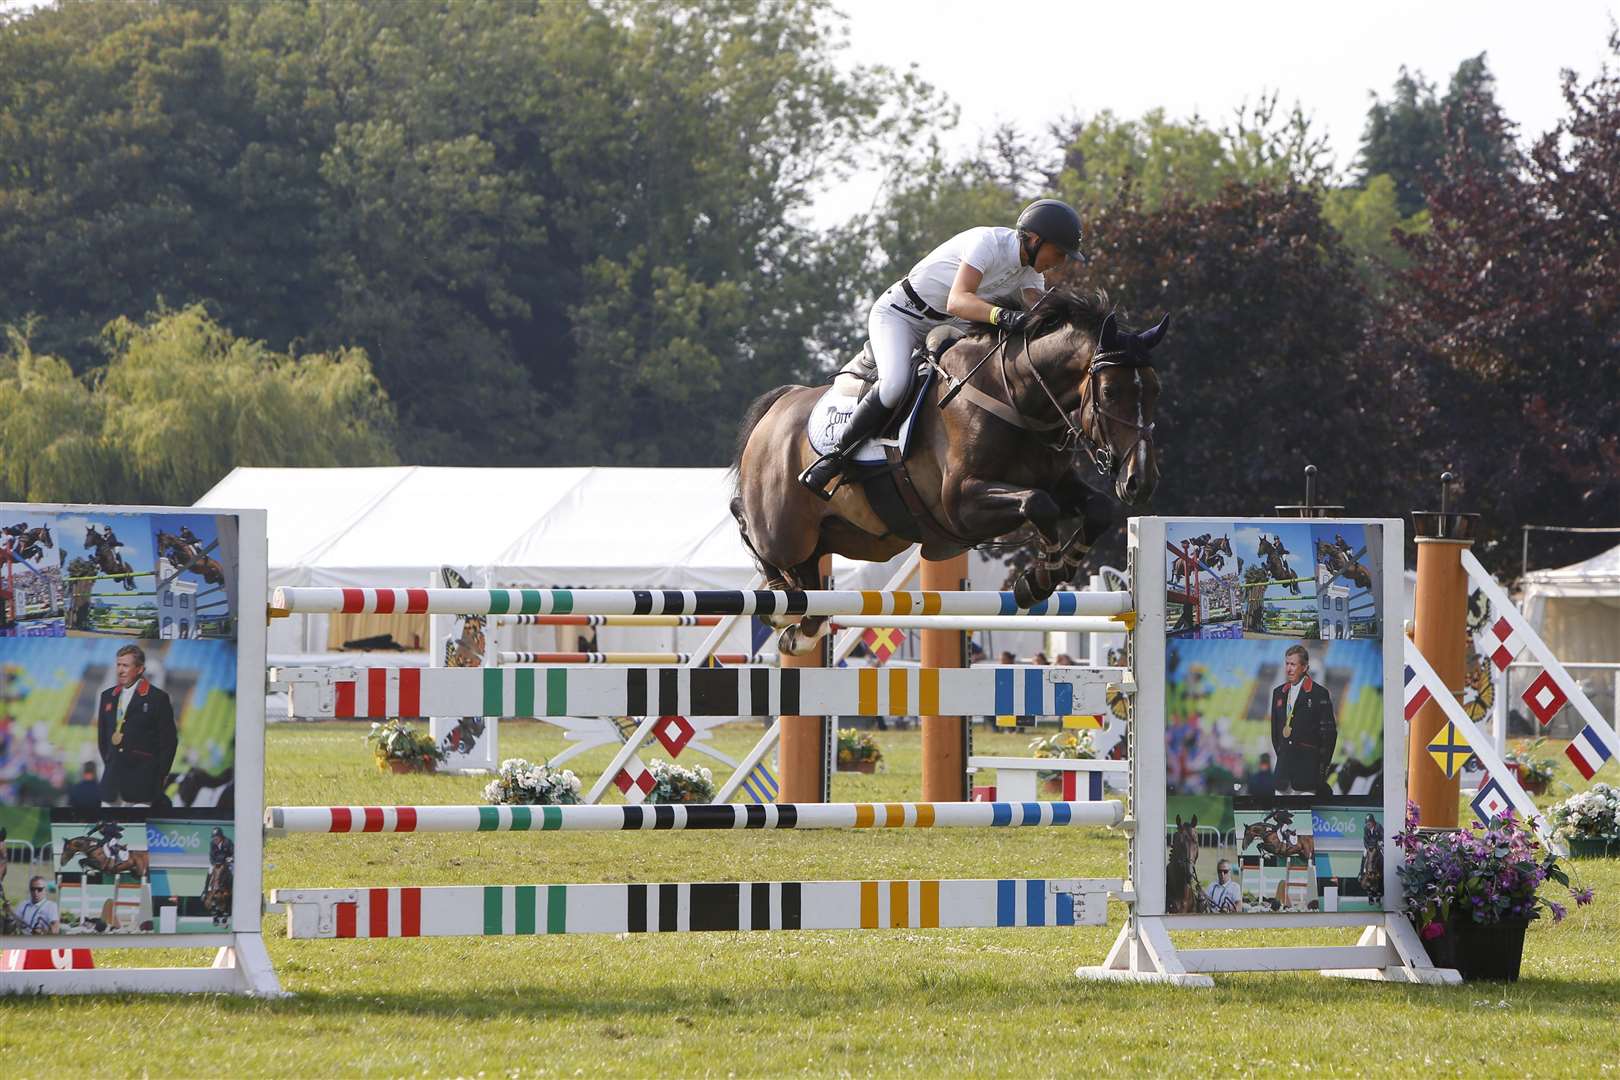 Action in the show-jumping arena